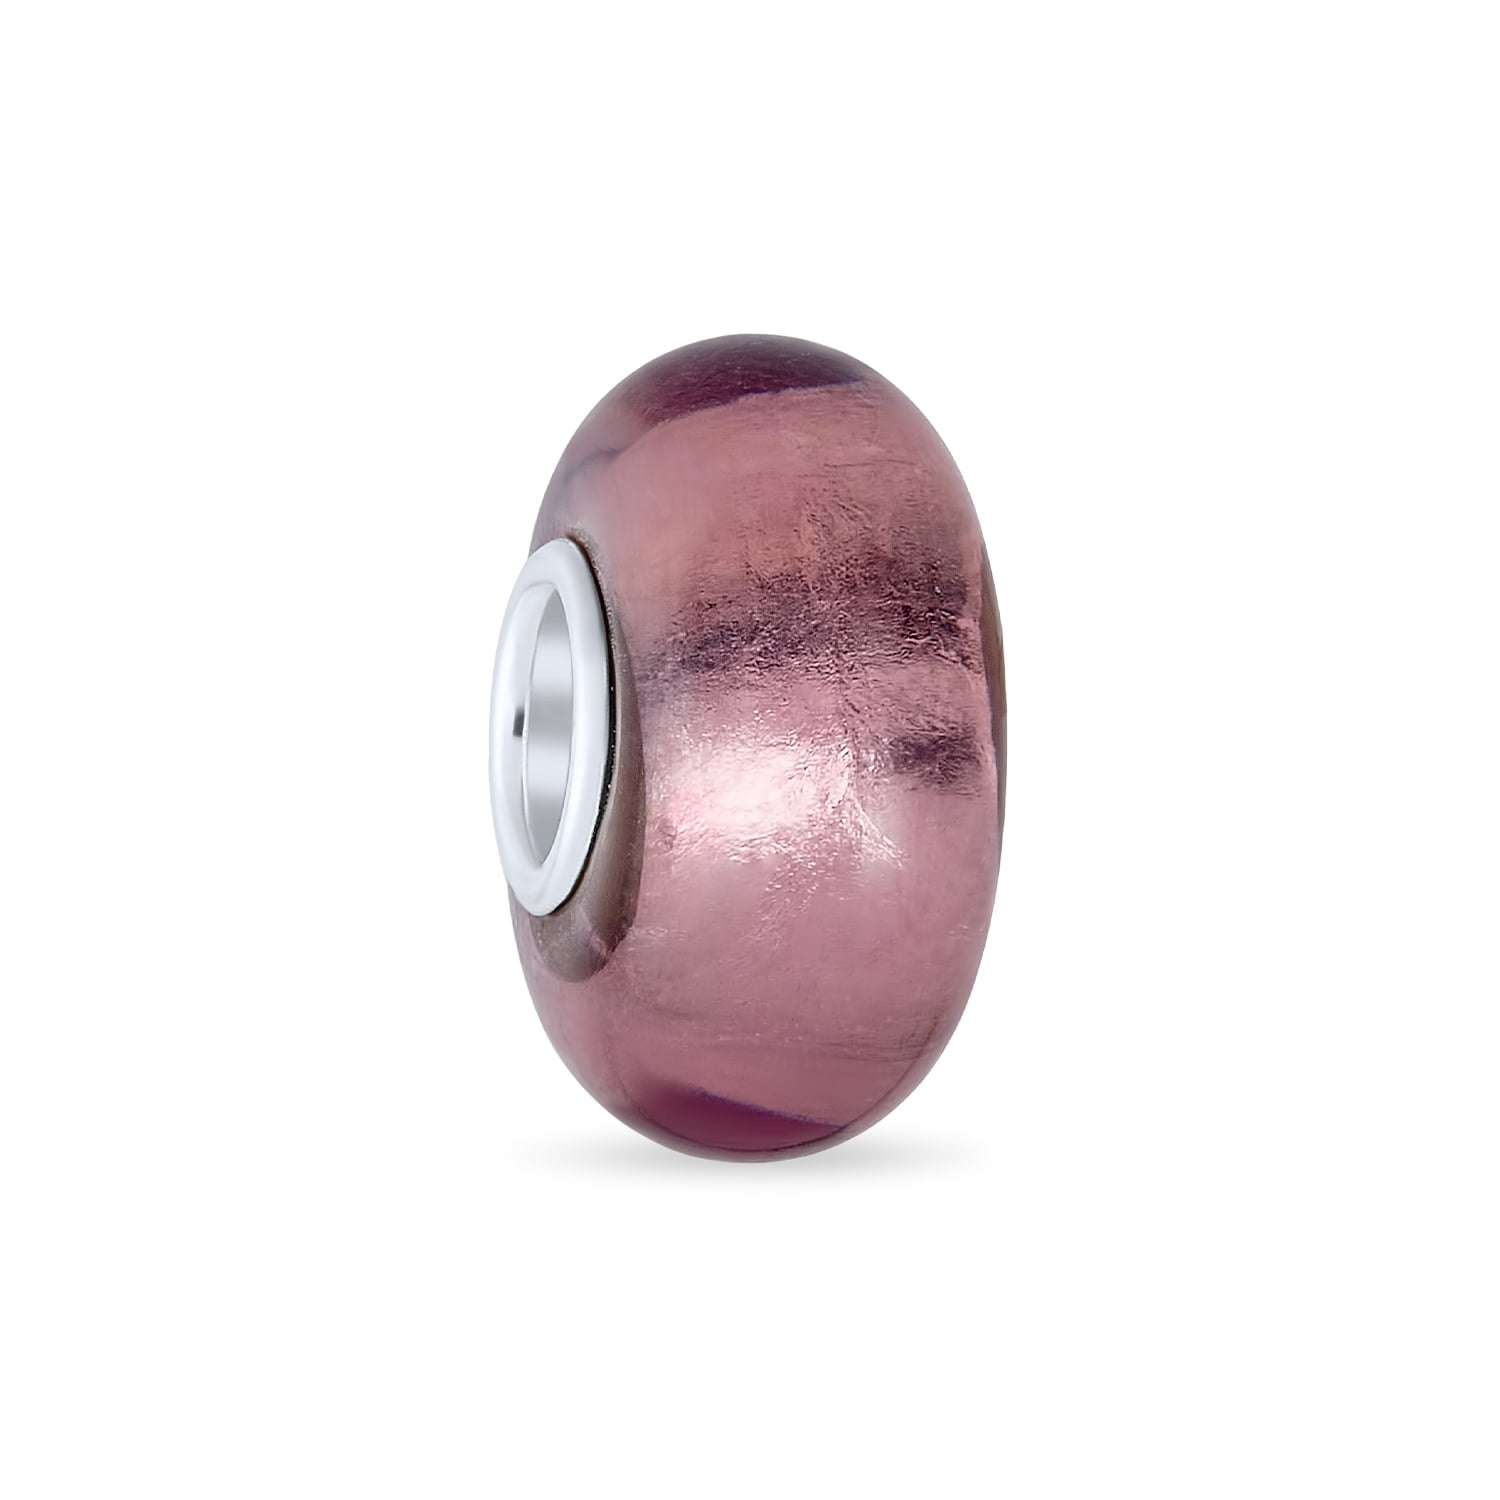 Pink Translucent Glass Bead Charm With Darker Pink Swirl Design  Single core-Fits all Designer and European Charm Bracelets